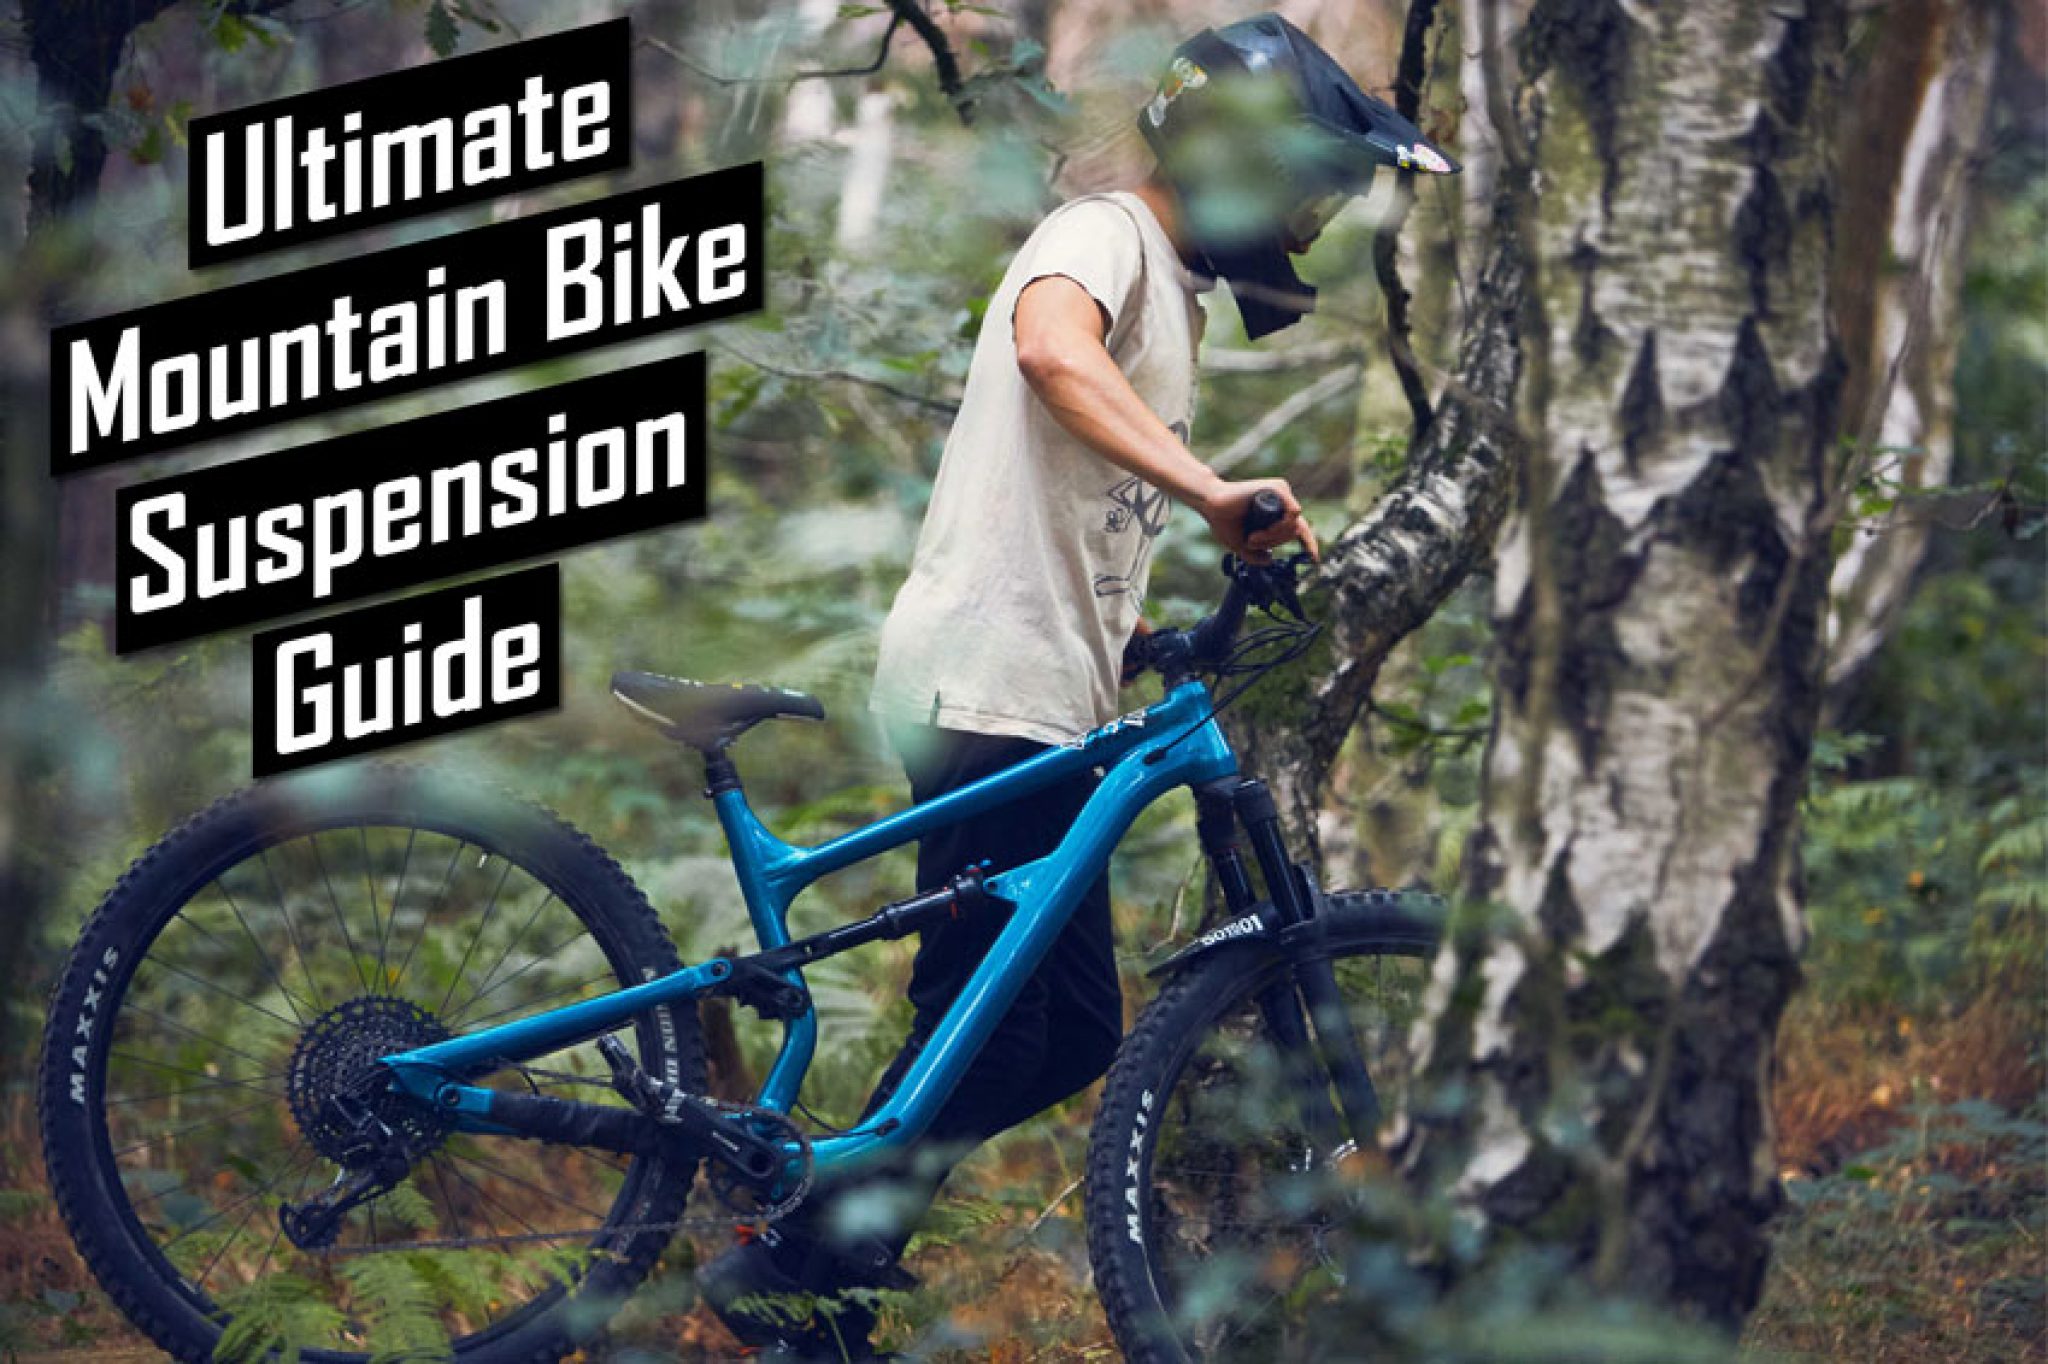 Complete Mountain Bike Suspension Guide: Basic Terms and Setup